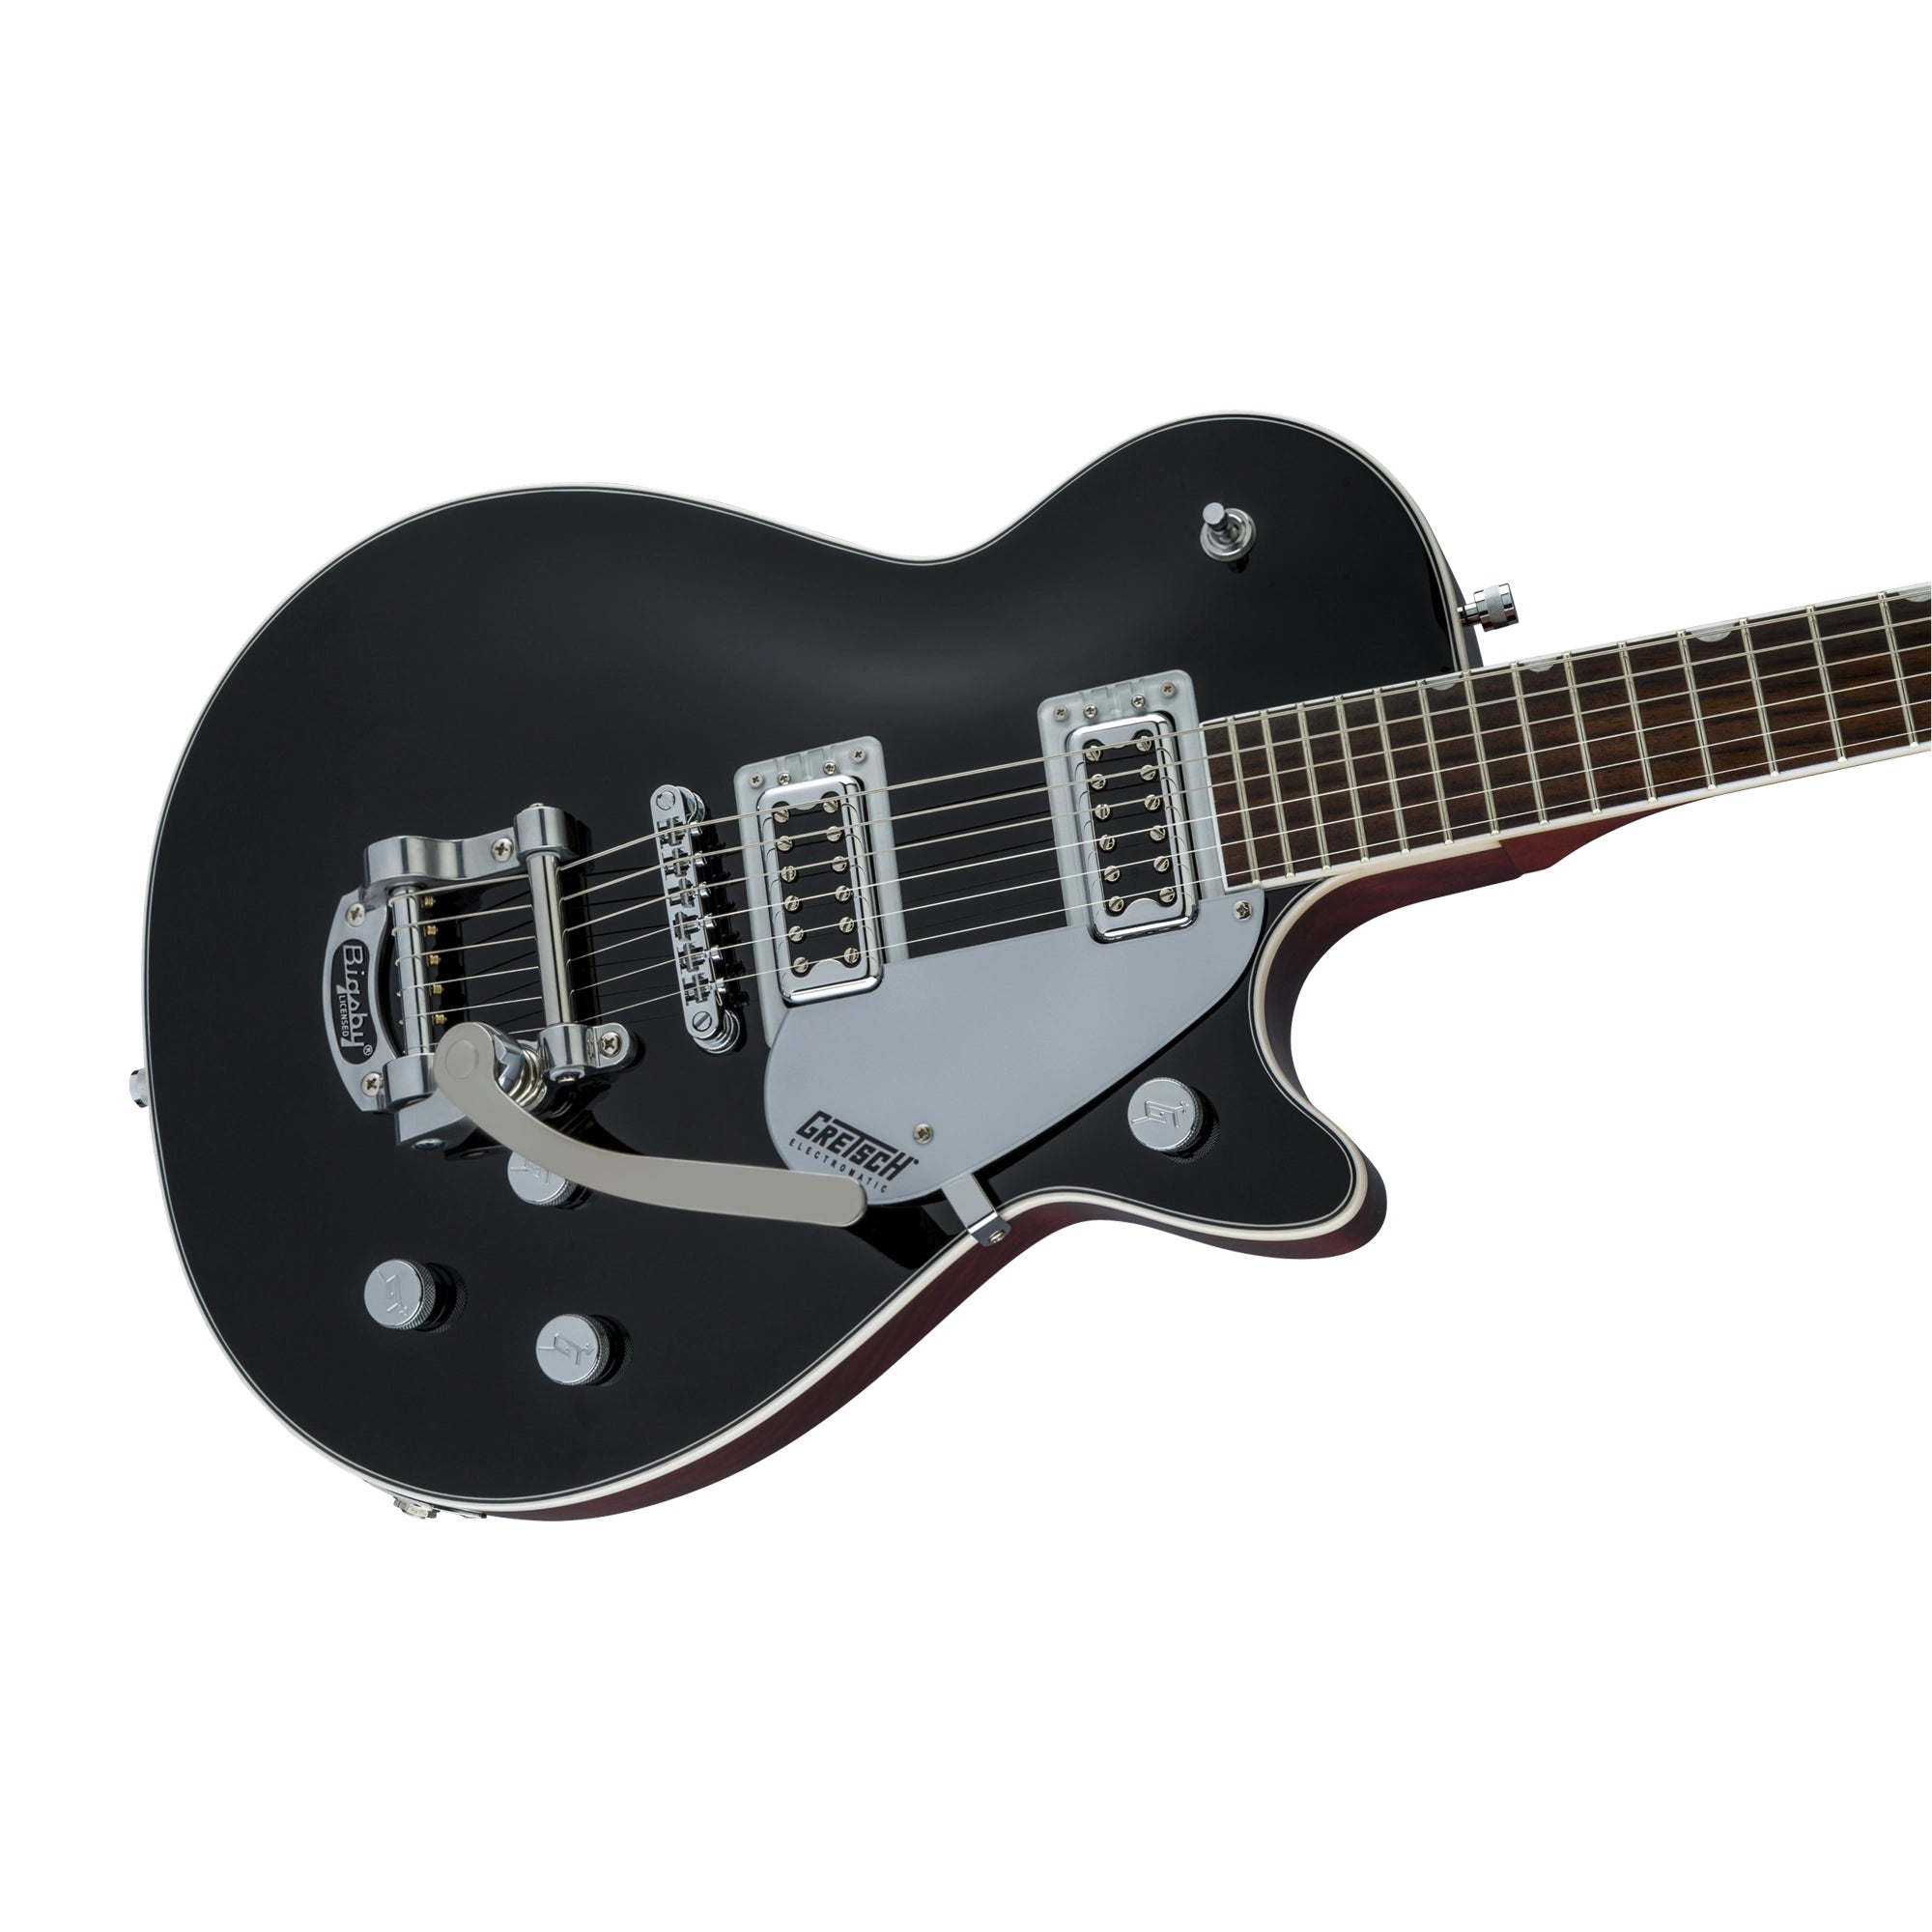 Gretsch G5230t Electromatic Jet Ft Solidbody Electric Guitar - Black